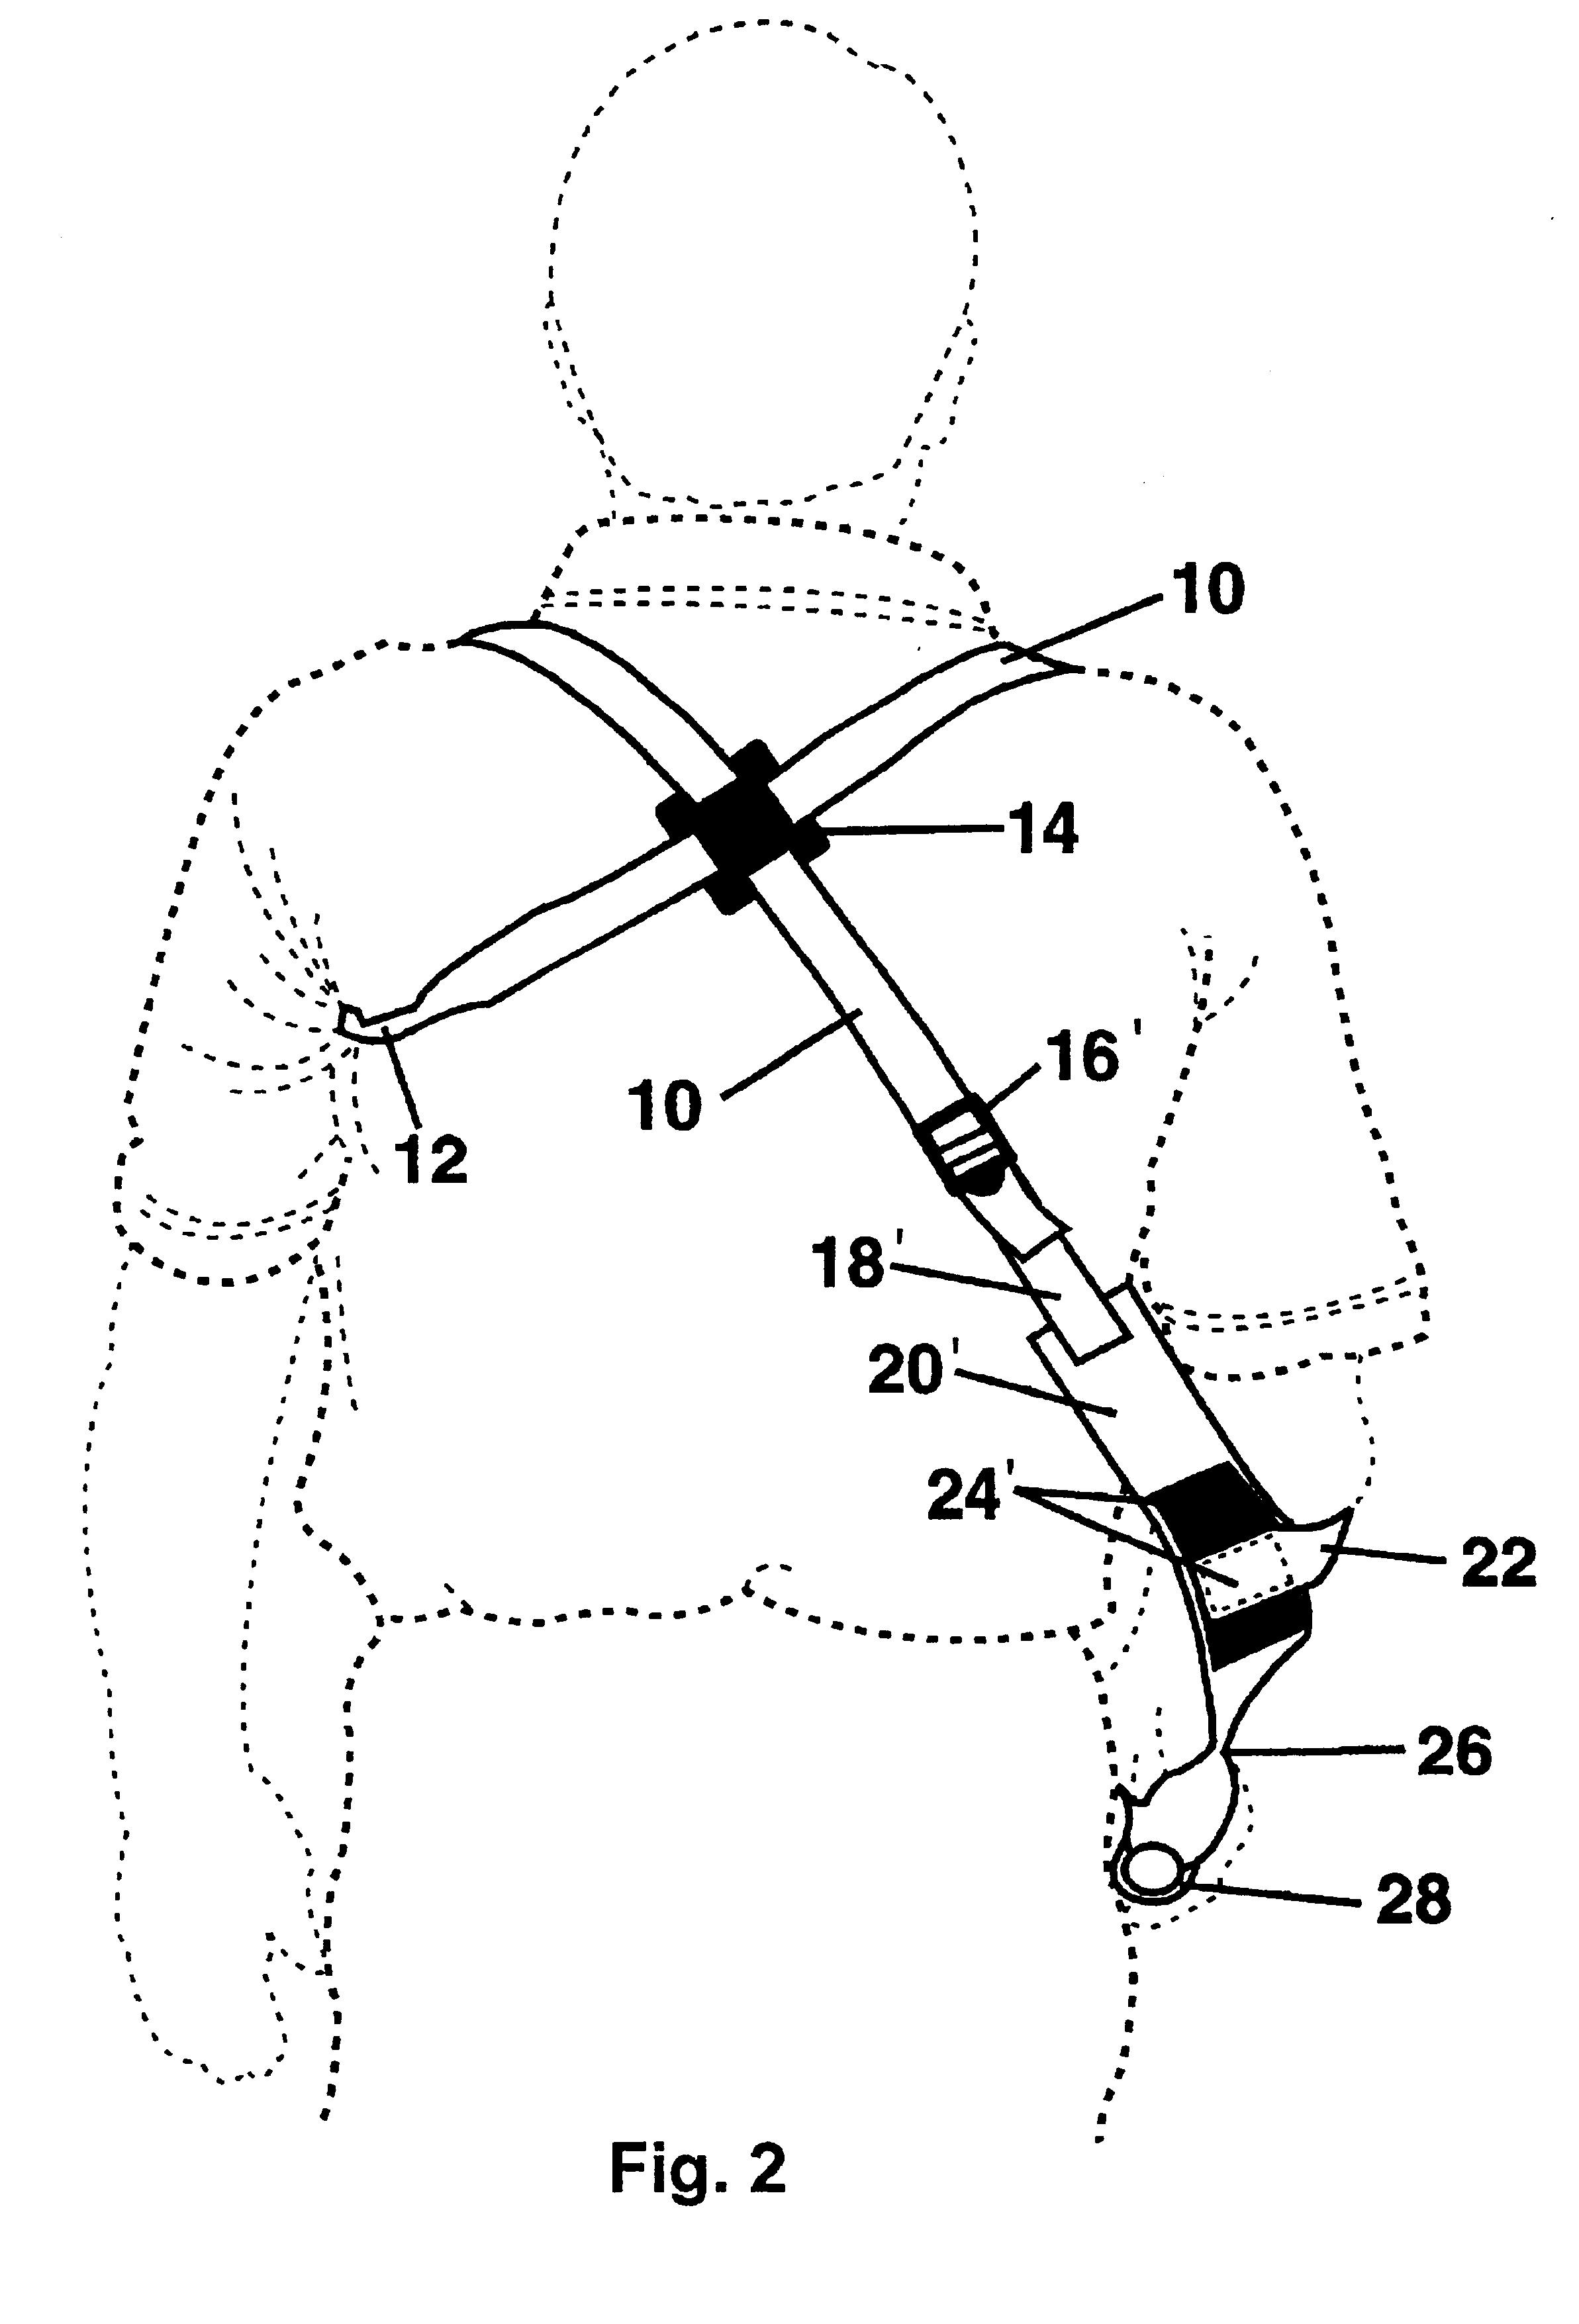 Flaccid upper extremity positioning apparatus